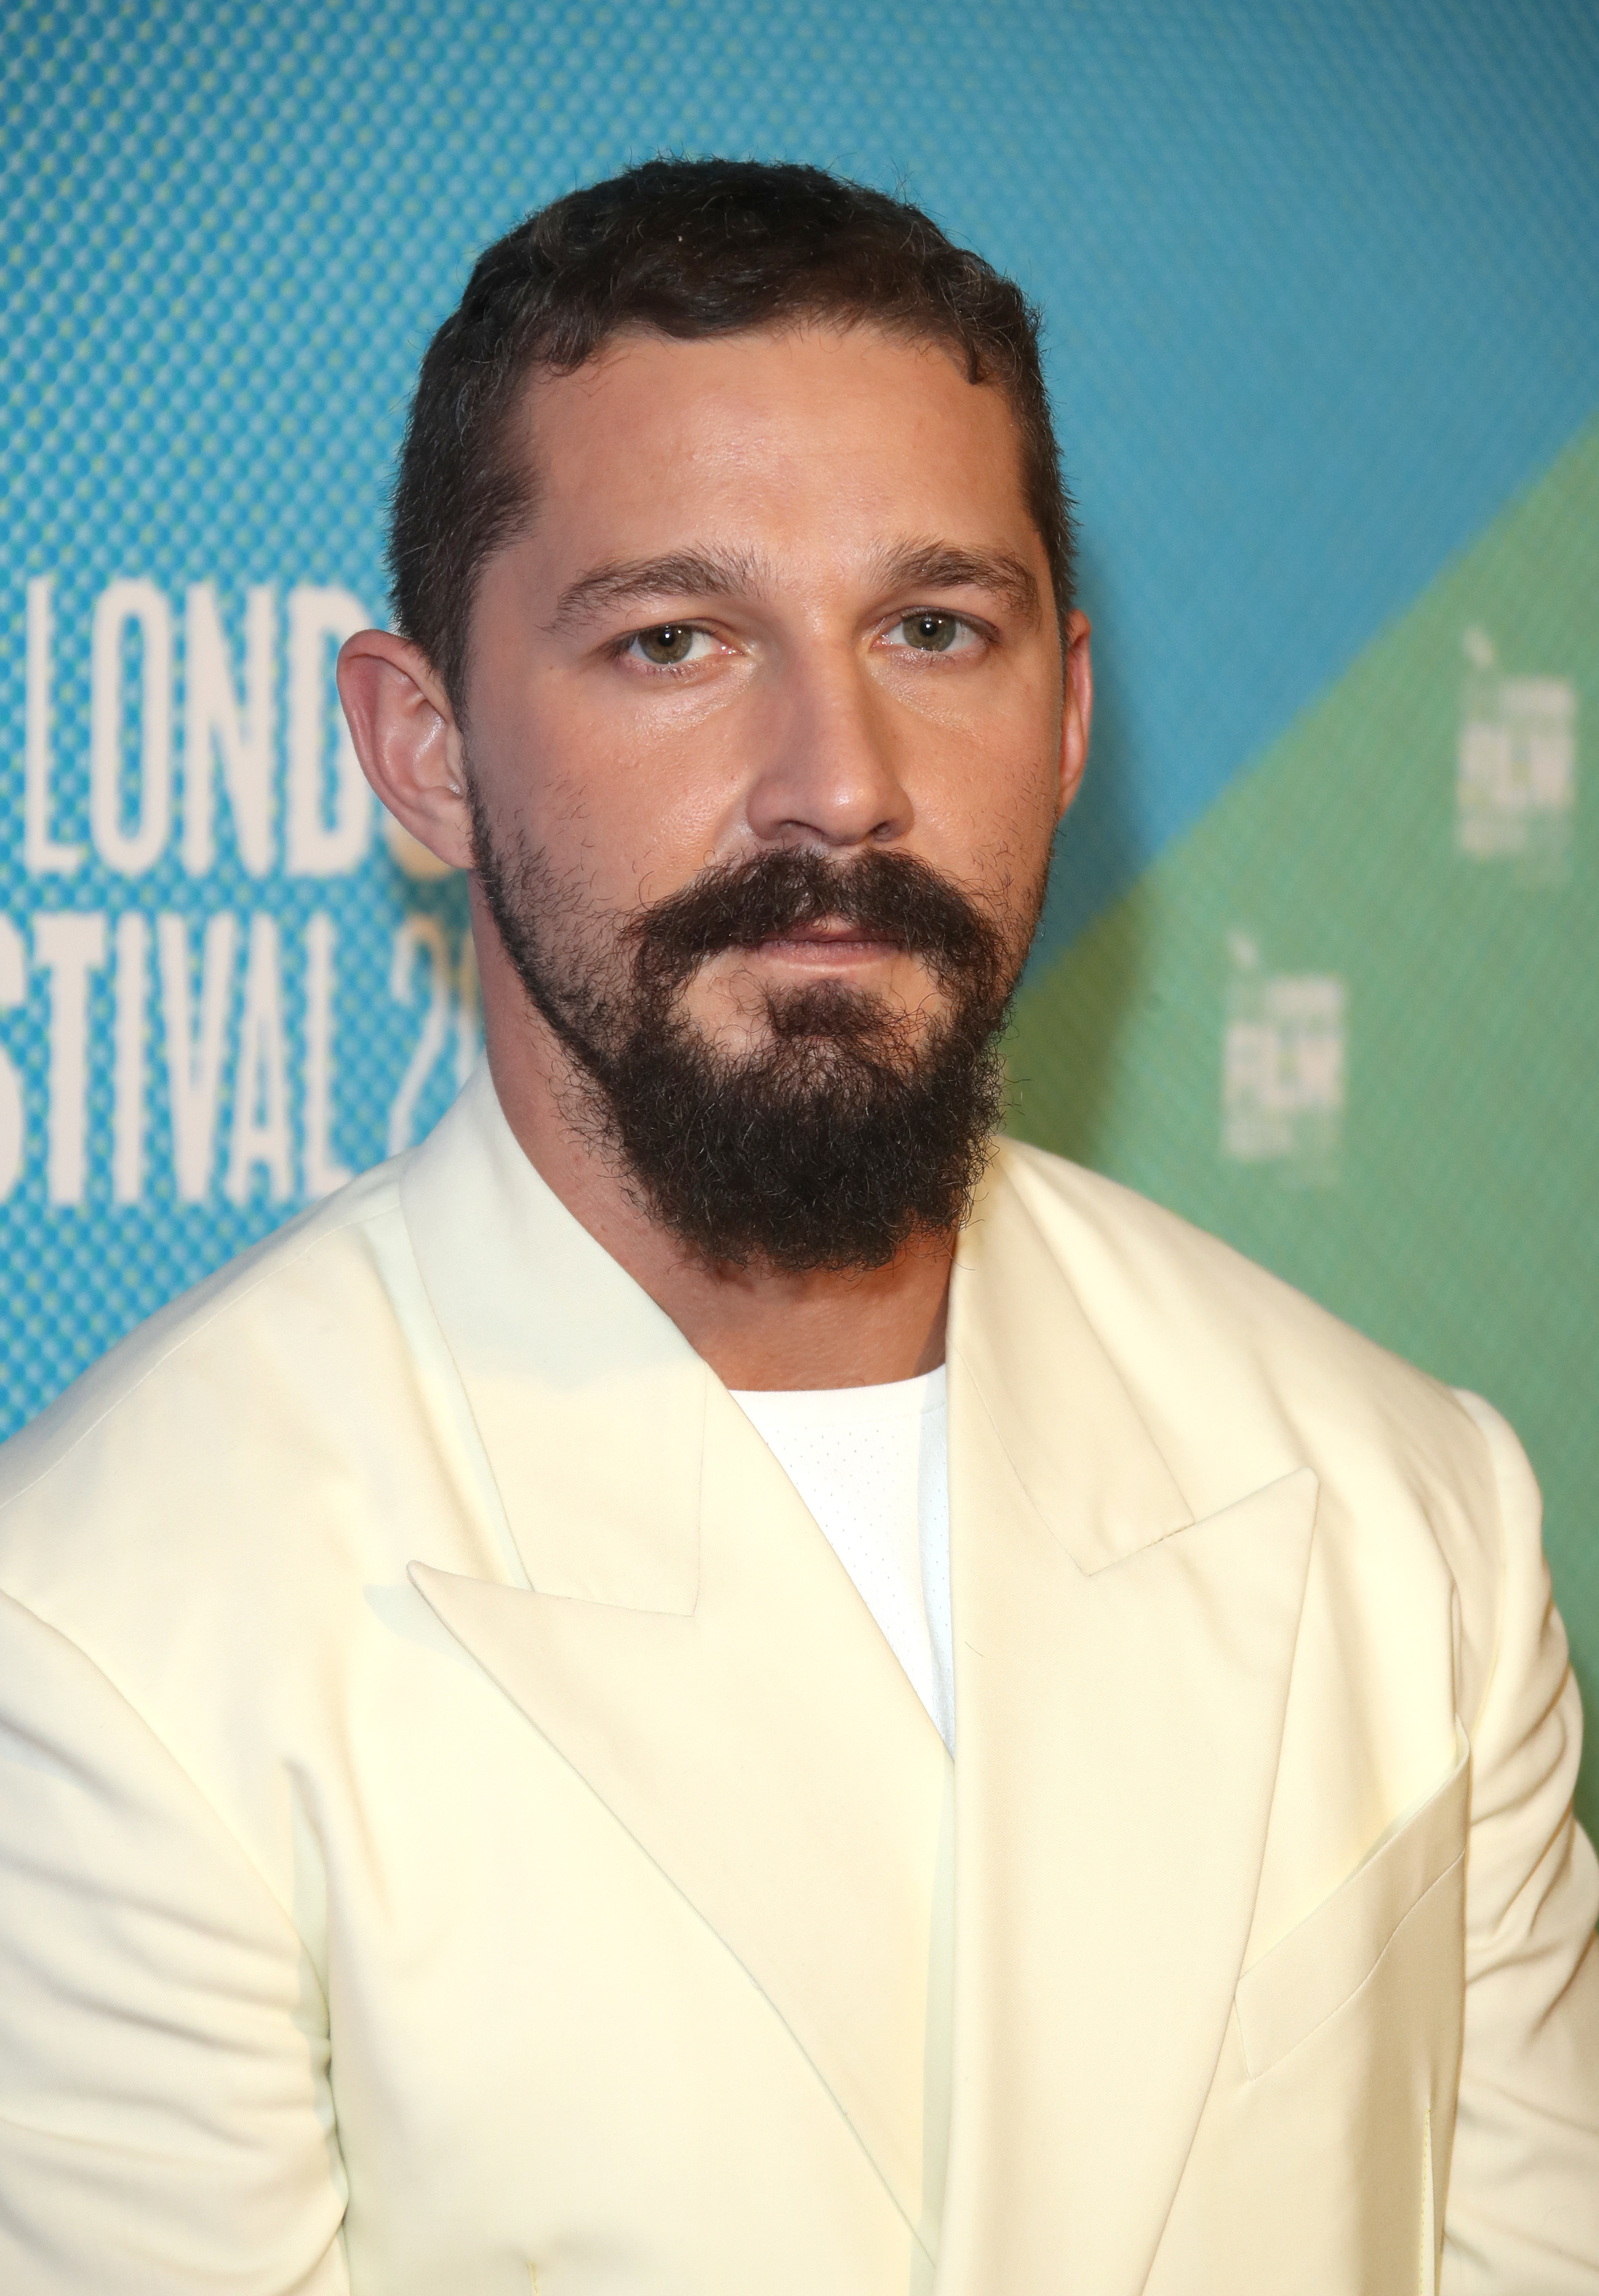 Shia with a beard in a light suit at an event